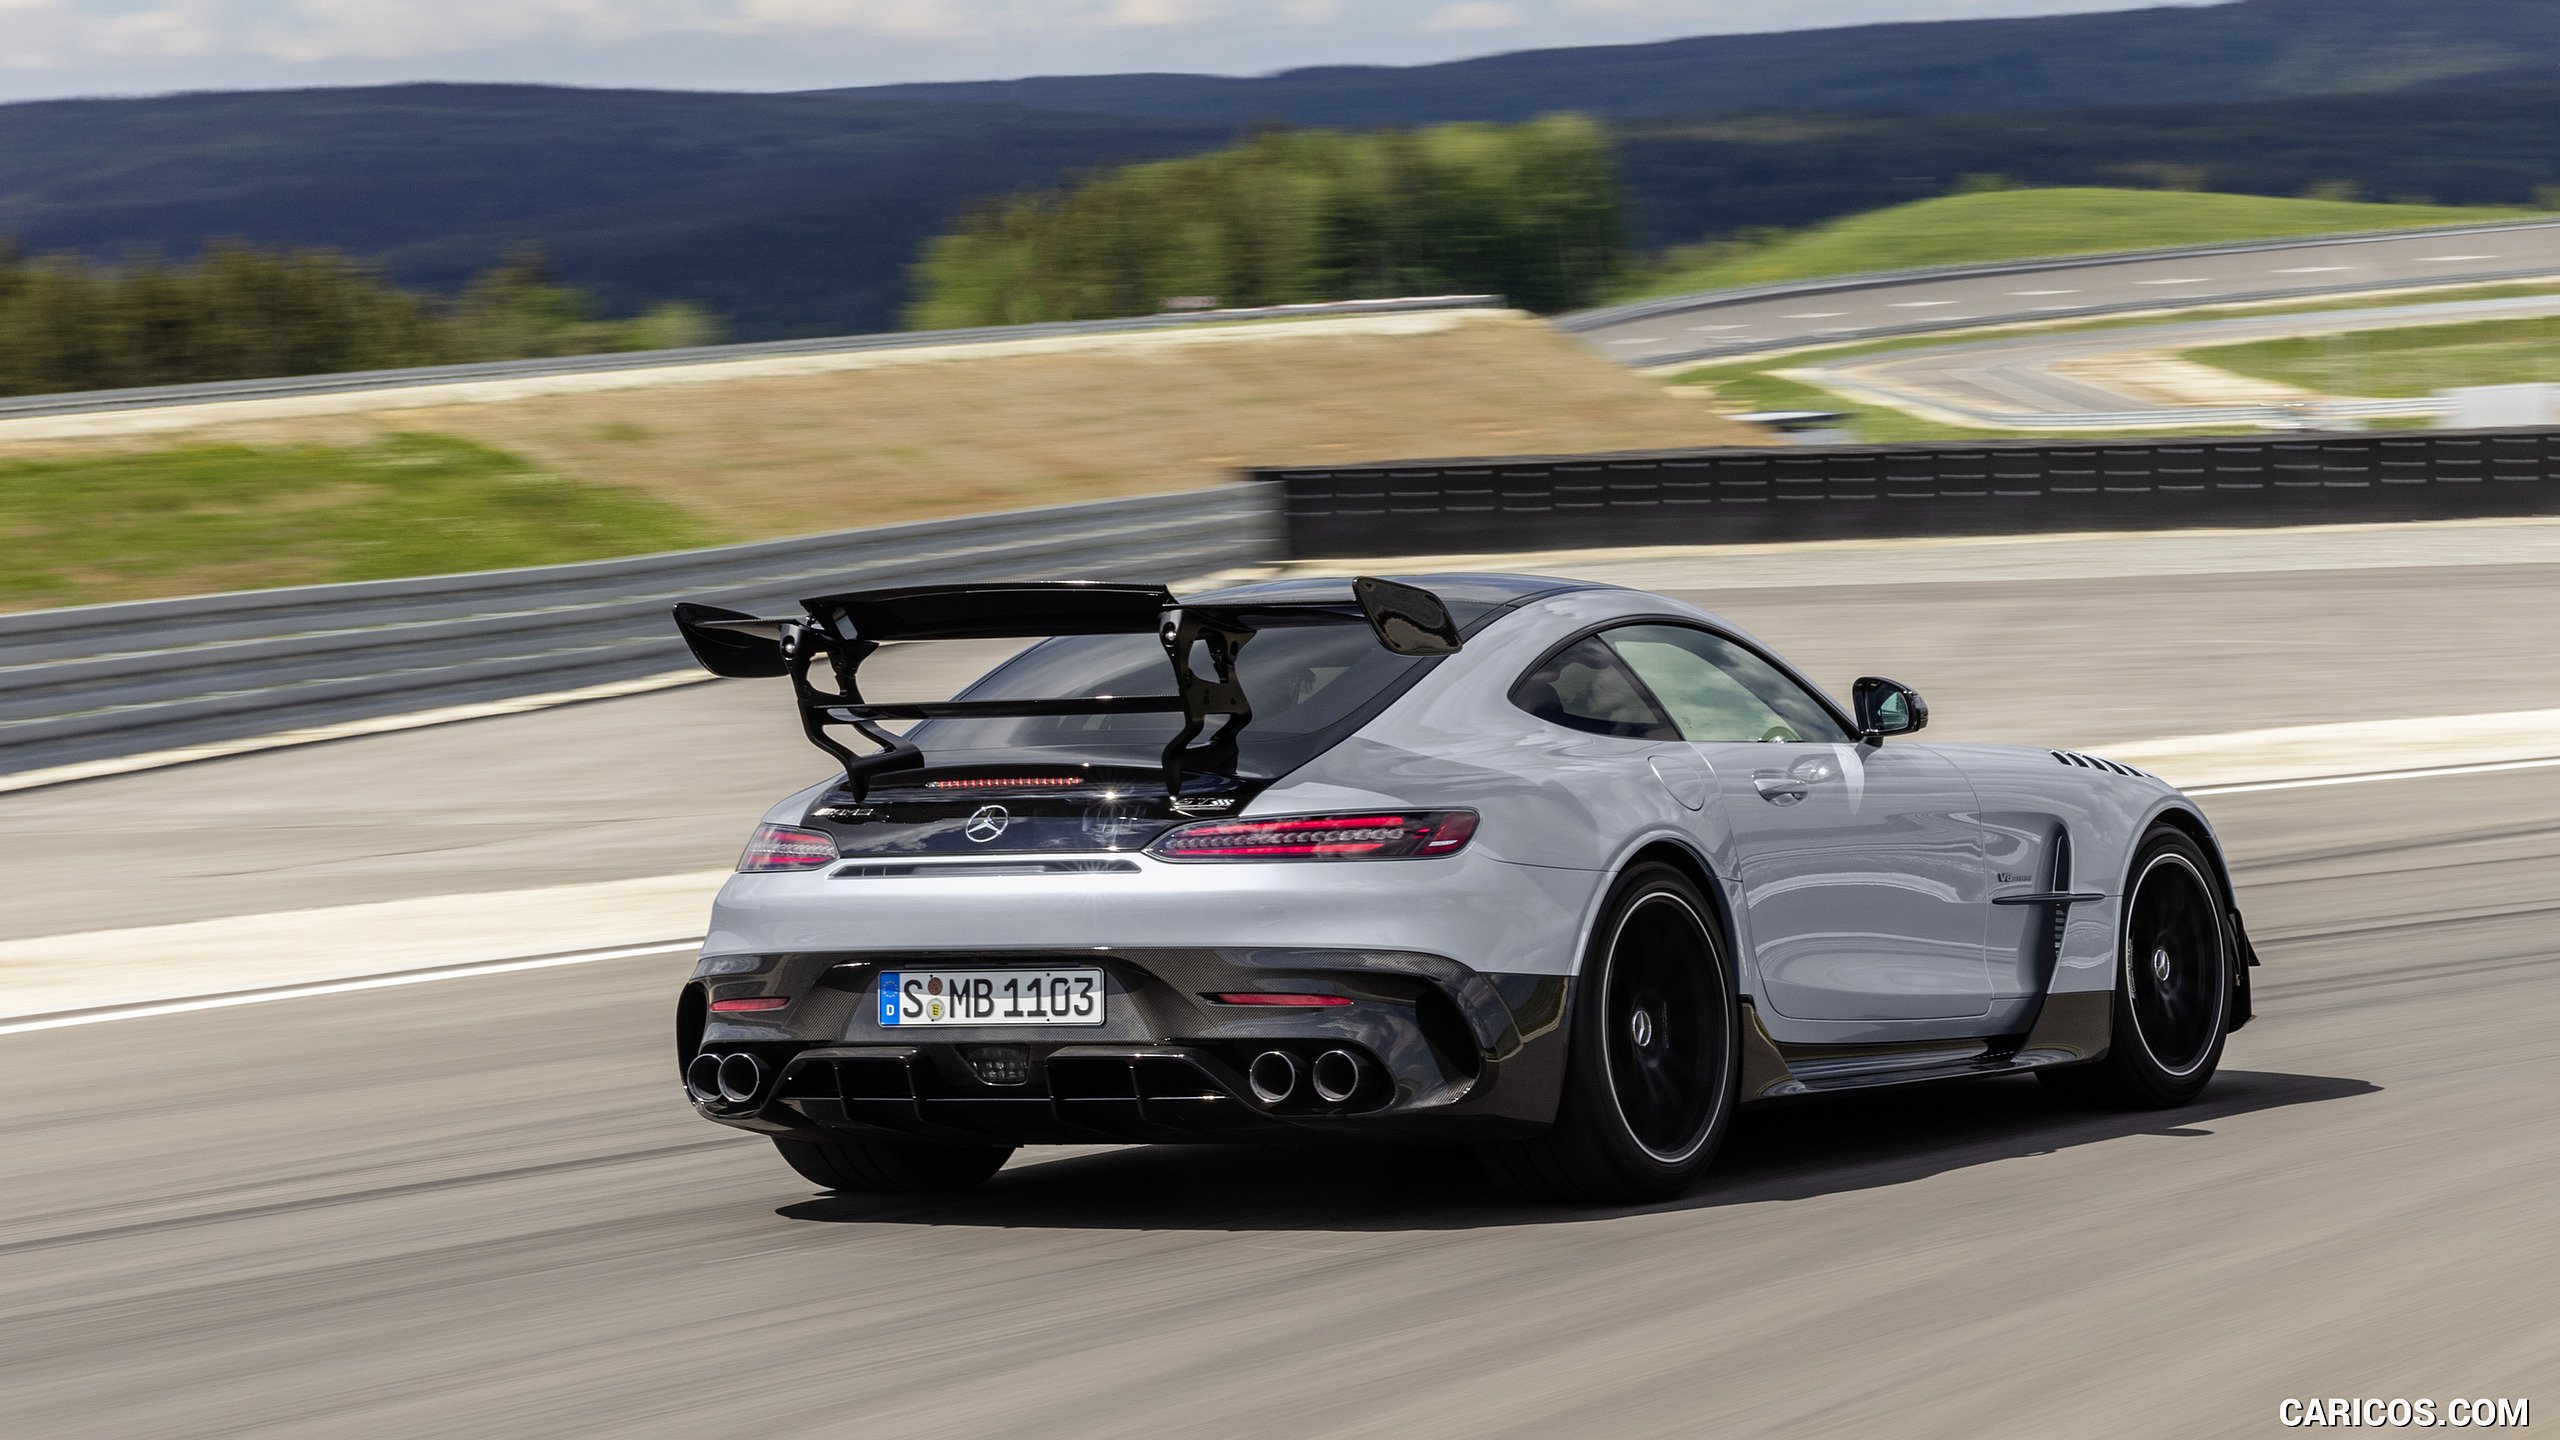 2021 Mercedes-AMG GT Black Series (Color: High Tech Silver) - Rear, #24 of 215